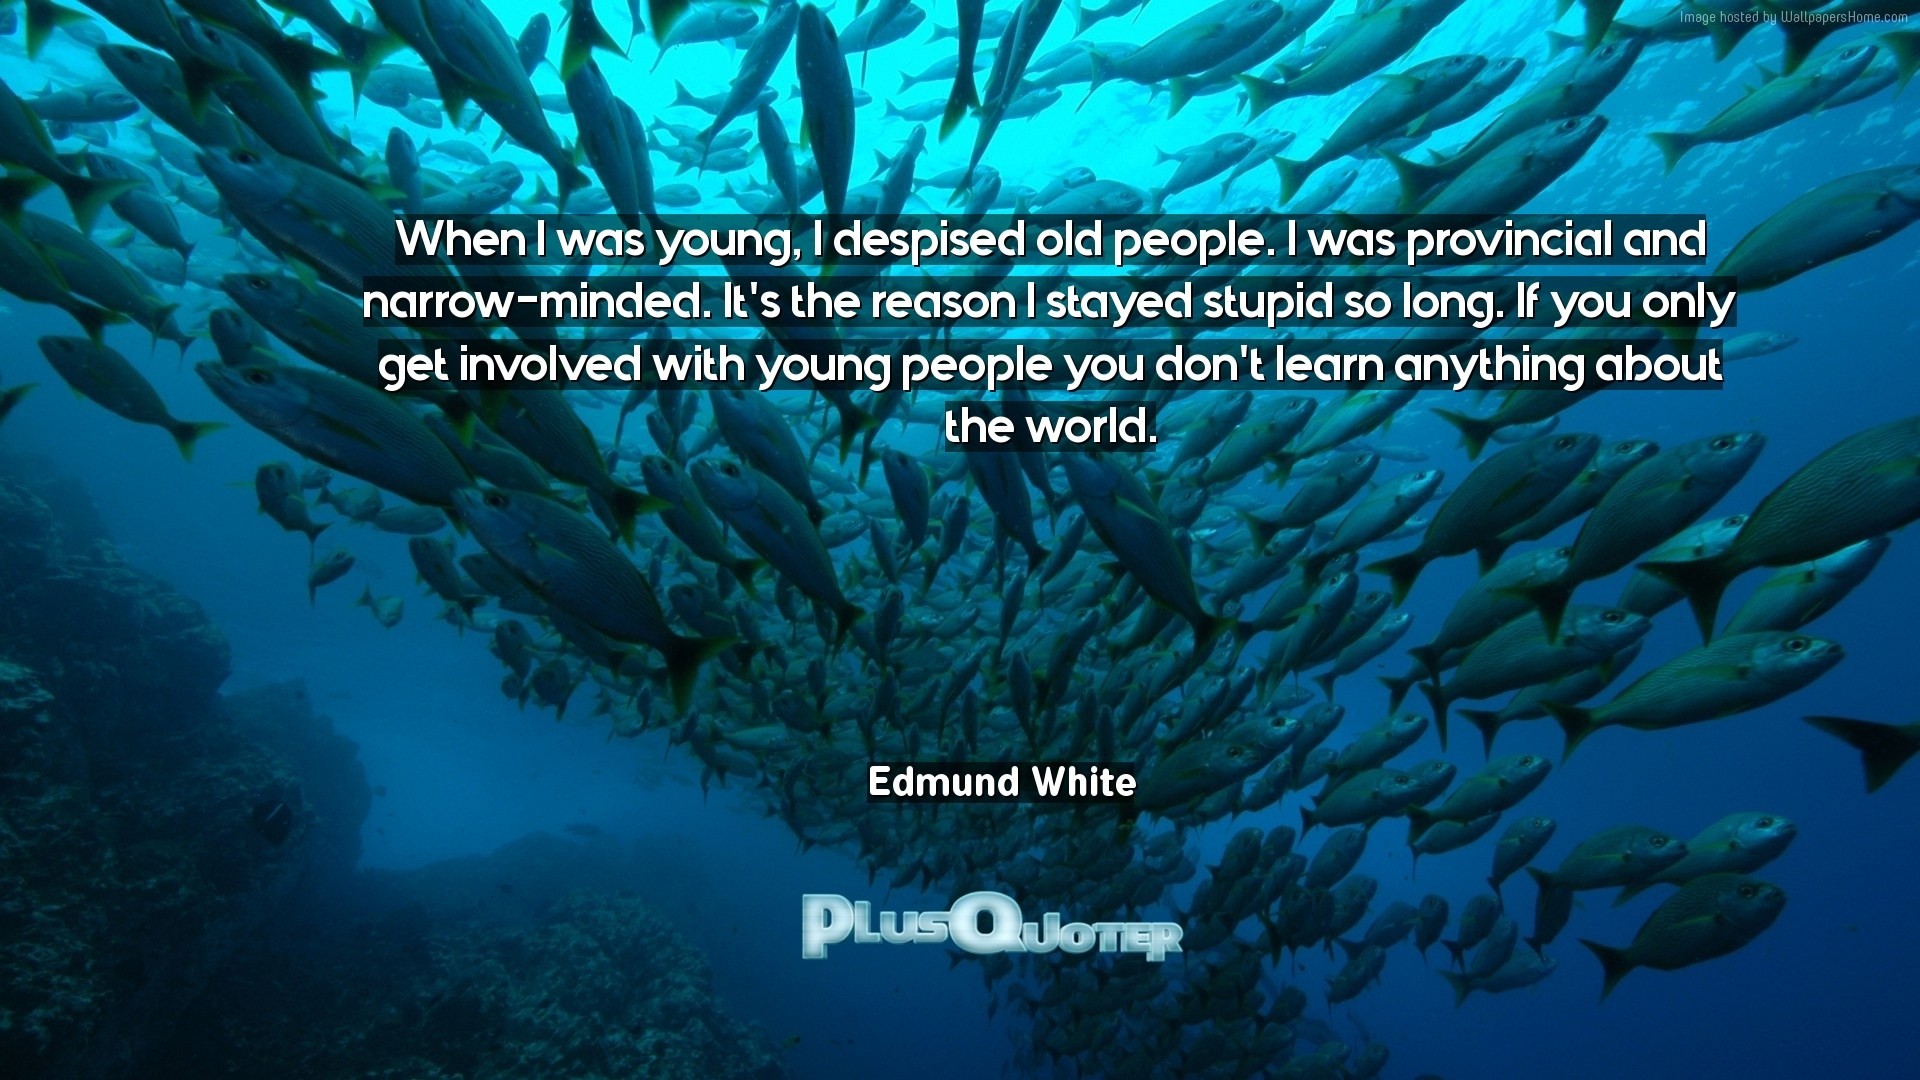 1920x1080 Download Wallpaper with inspirational Quotes- "When I was young, I despised  old people